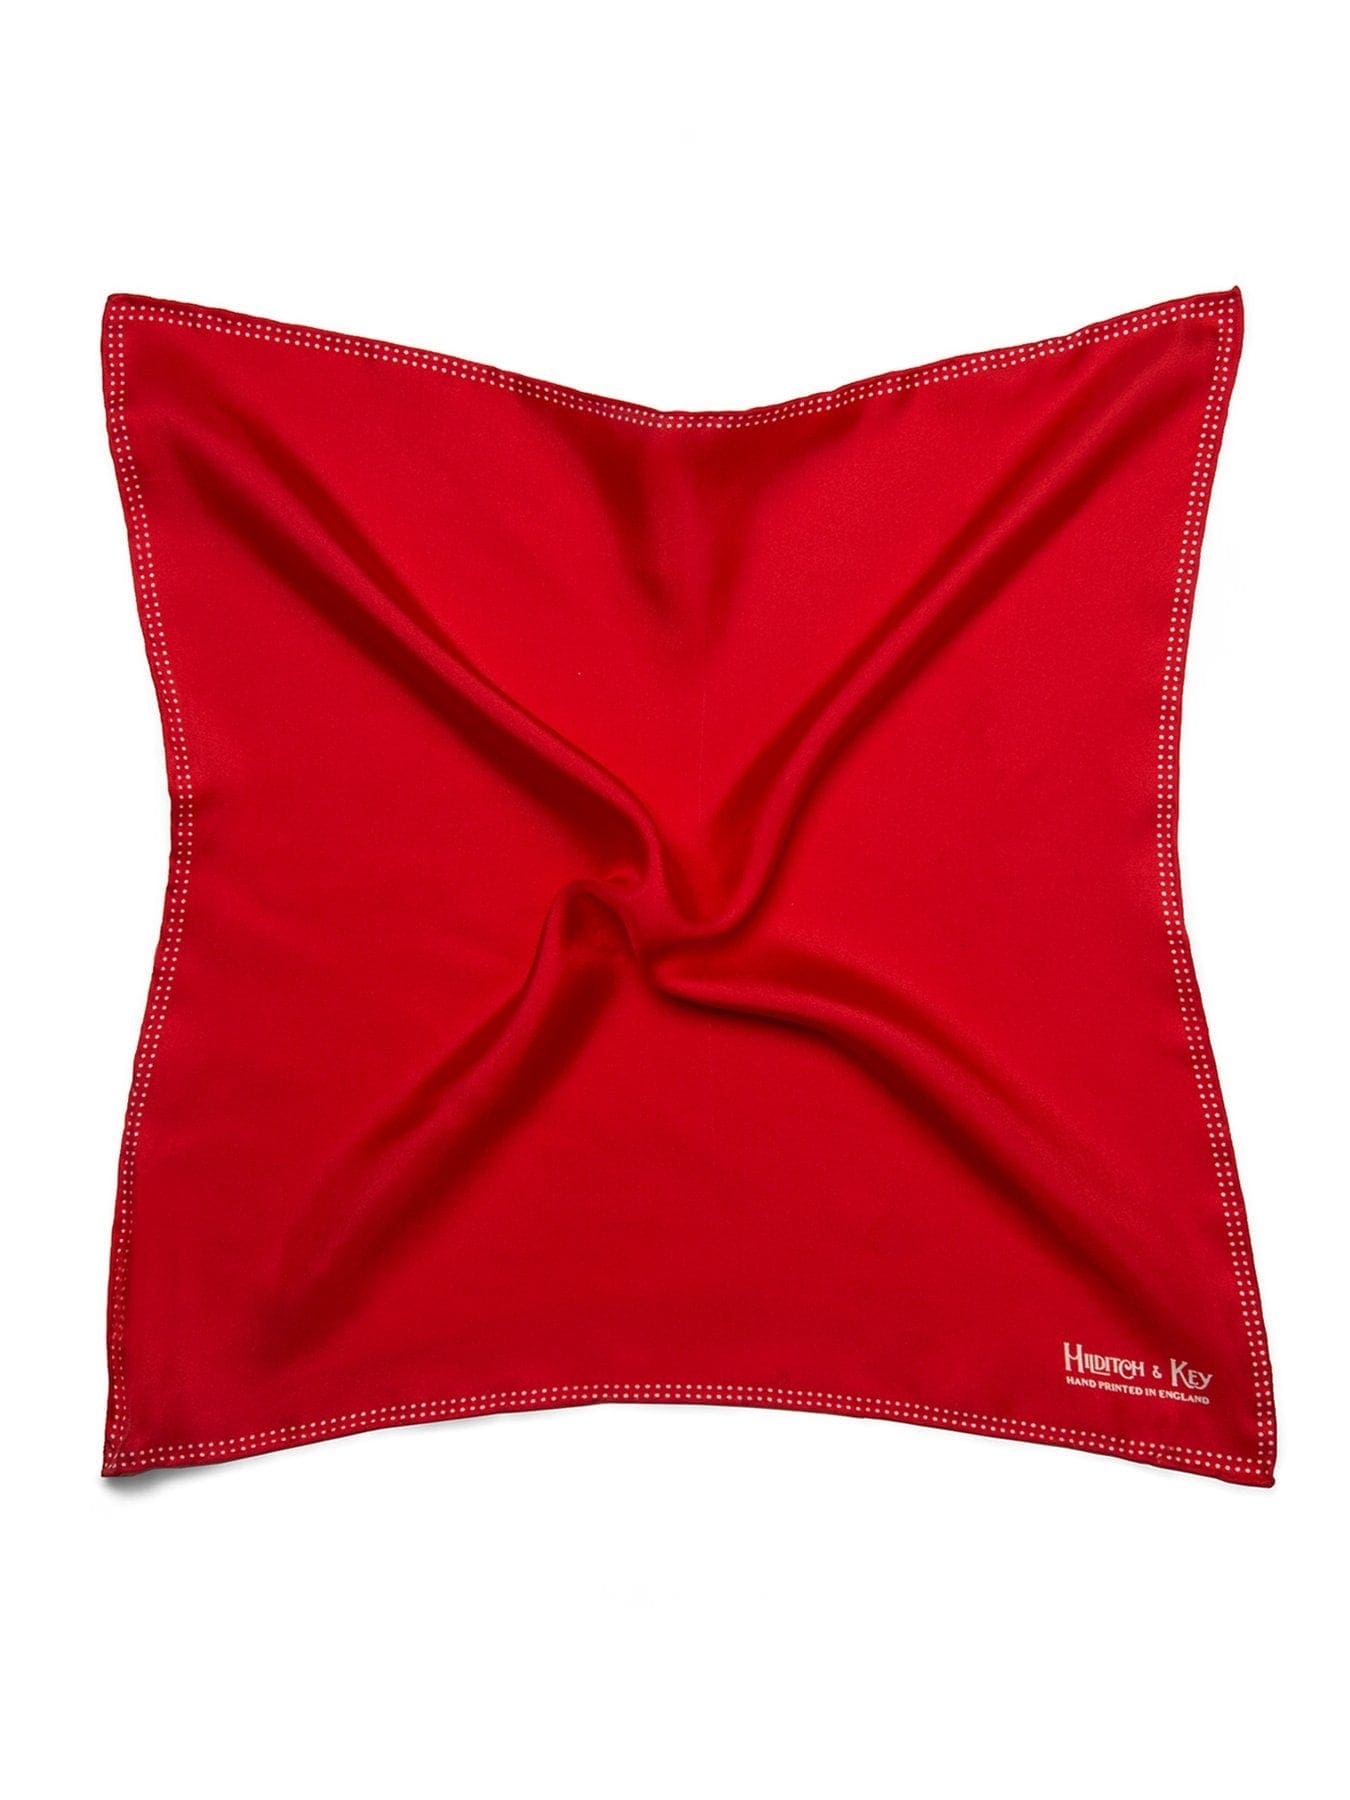 Red Silk Handkerchief with White Spots